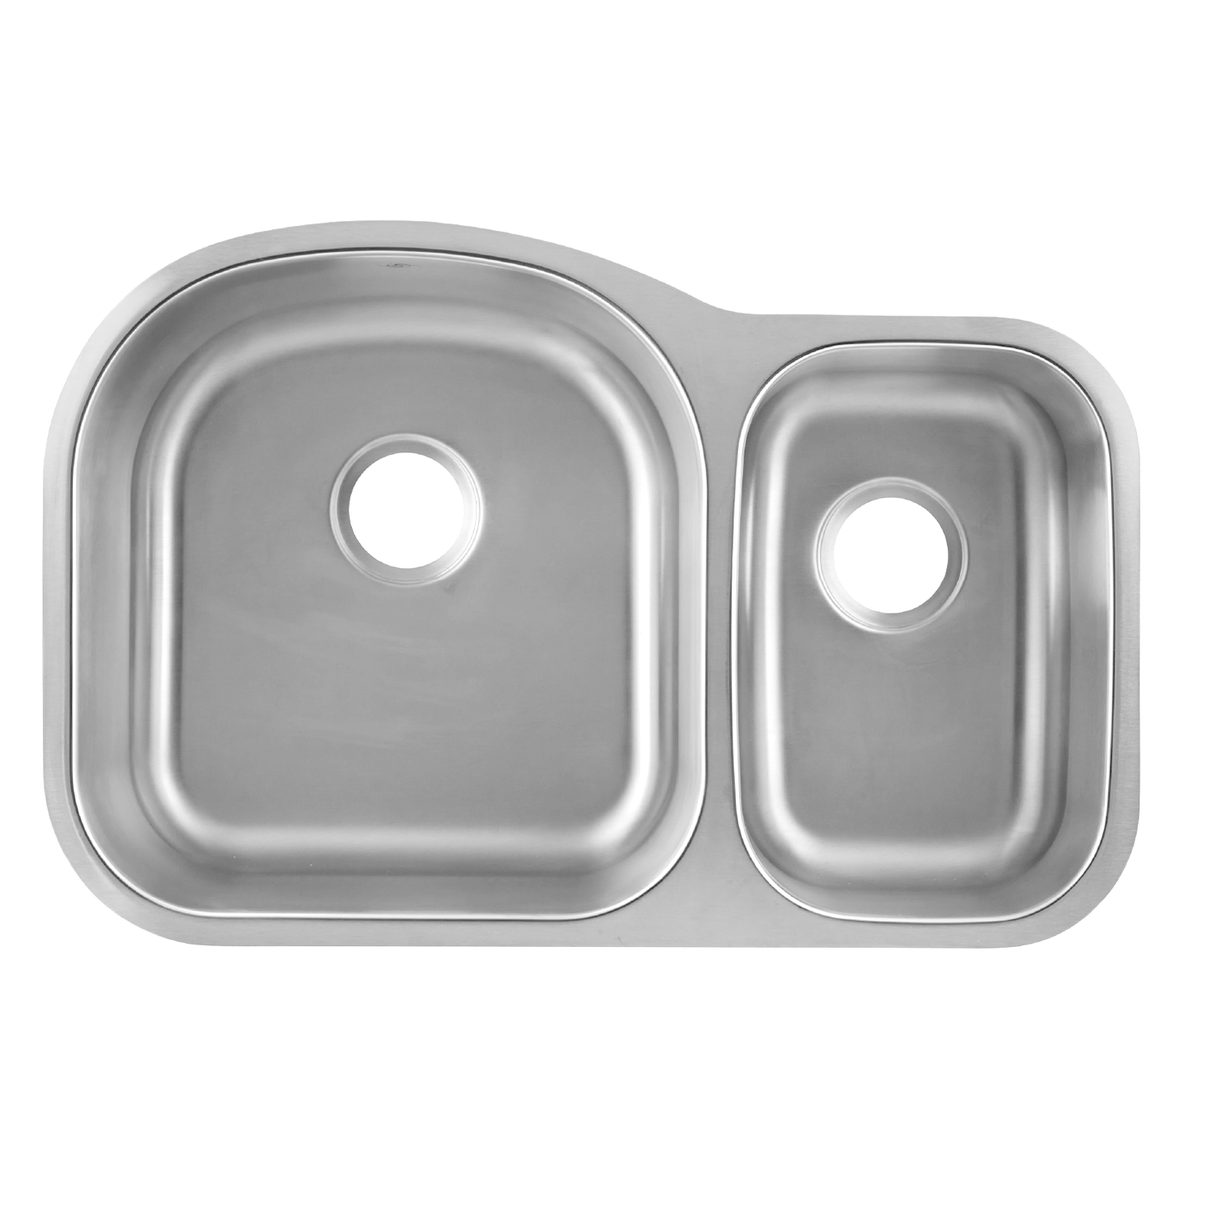 DAX Stainless Steel 70/ 30 Double Bowl Undermount Kitchen Sink, Brushed Stainless Steel DAX-3121L